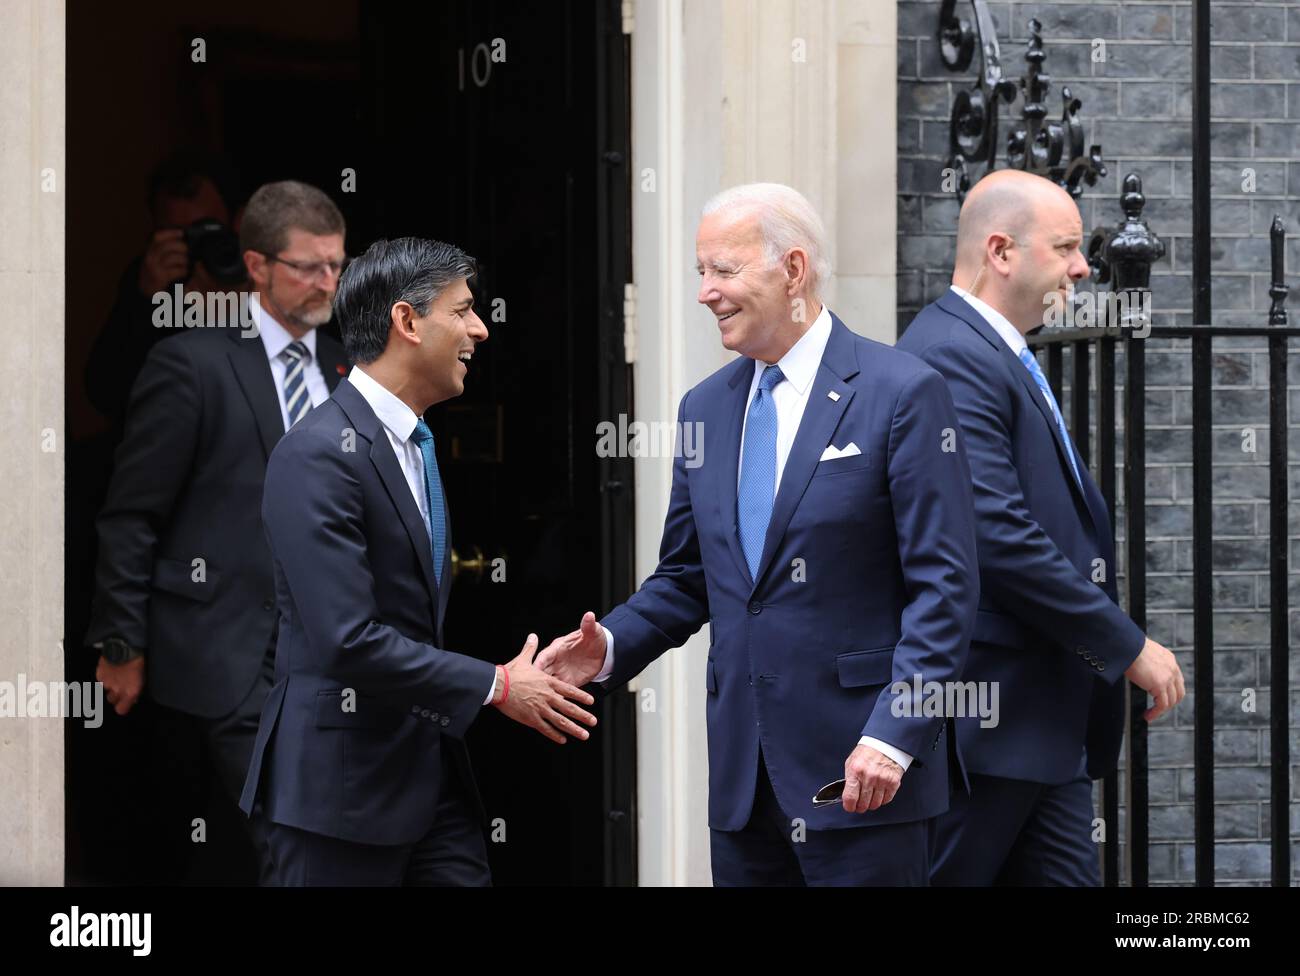 London, UK, 10th July 2023. British PM and American President Joe Biden greeted each other warmly at Downing Street this morning, despite the public disagreement within the alliance over the US's recent decision to send cluster bombs to help Ukraine. Biden was next heading off to meet King Charles at Windsor. Credit : Monica Wells/Alamy Live News Stock Photo